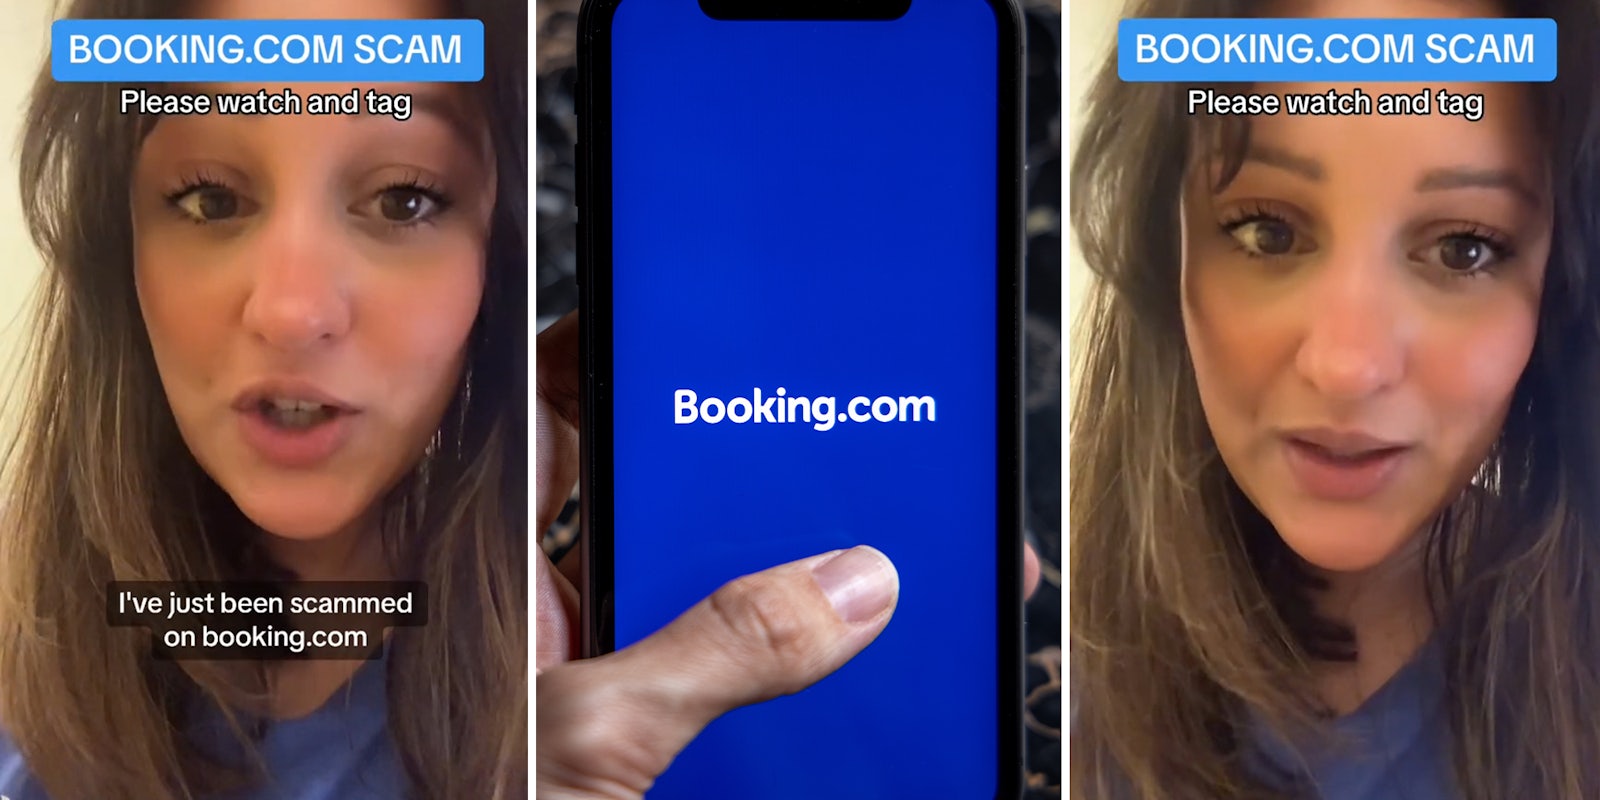 woman was scammed using booking.com